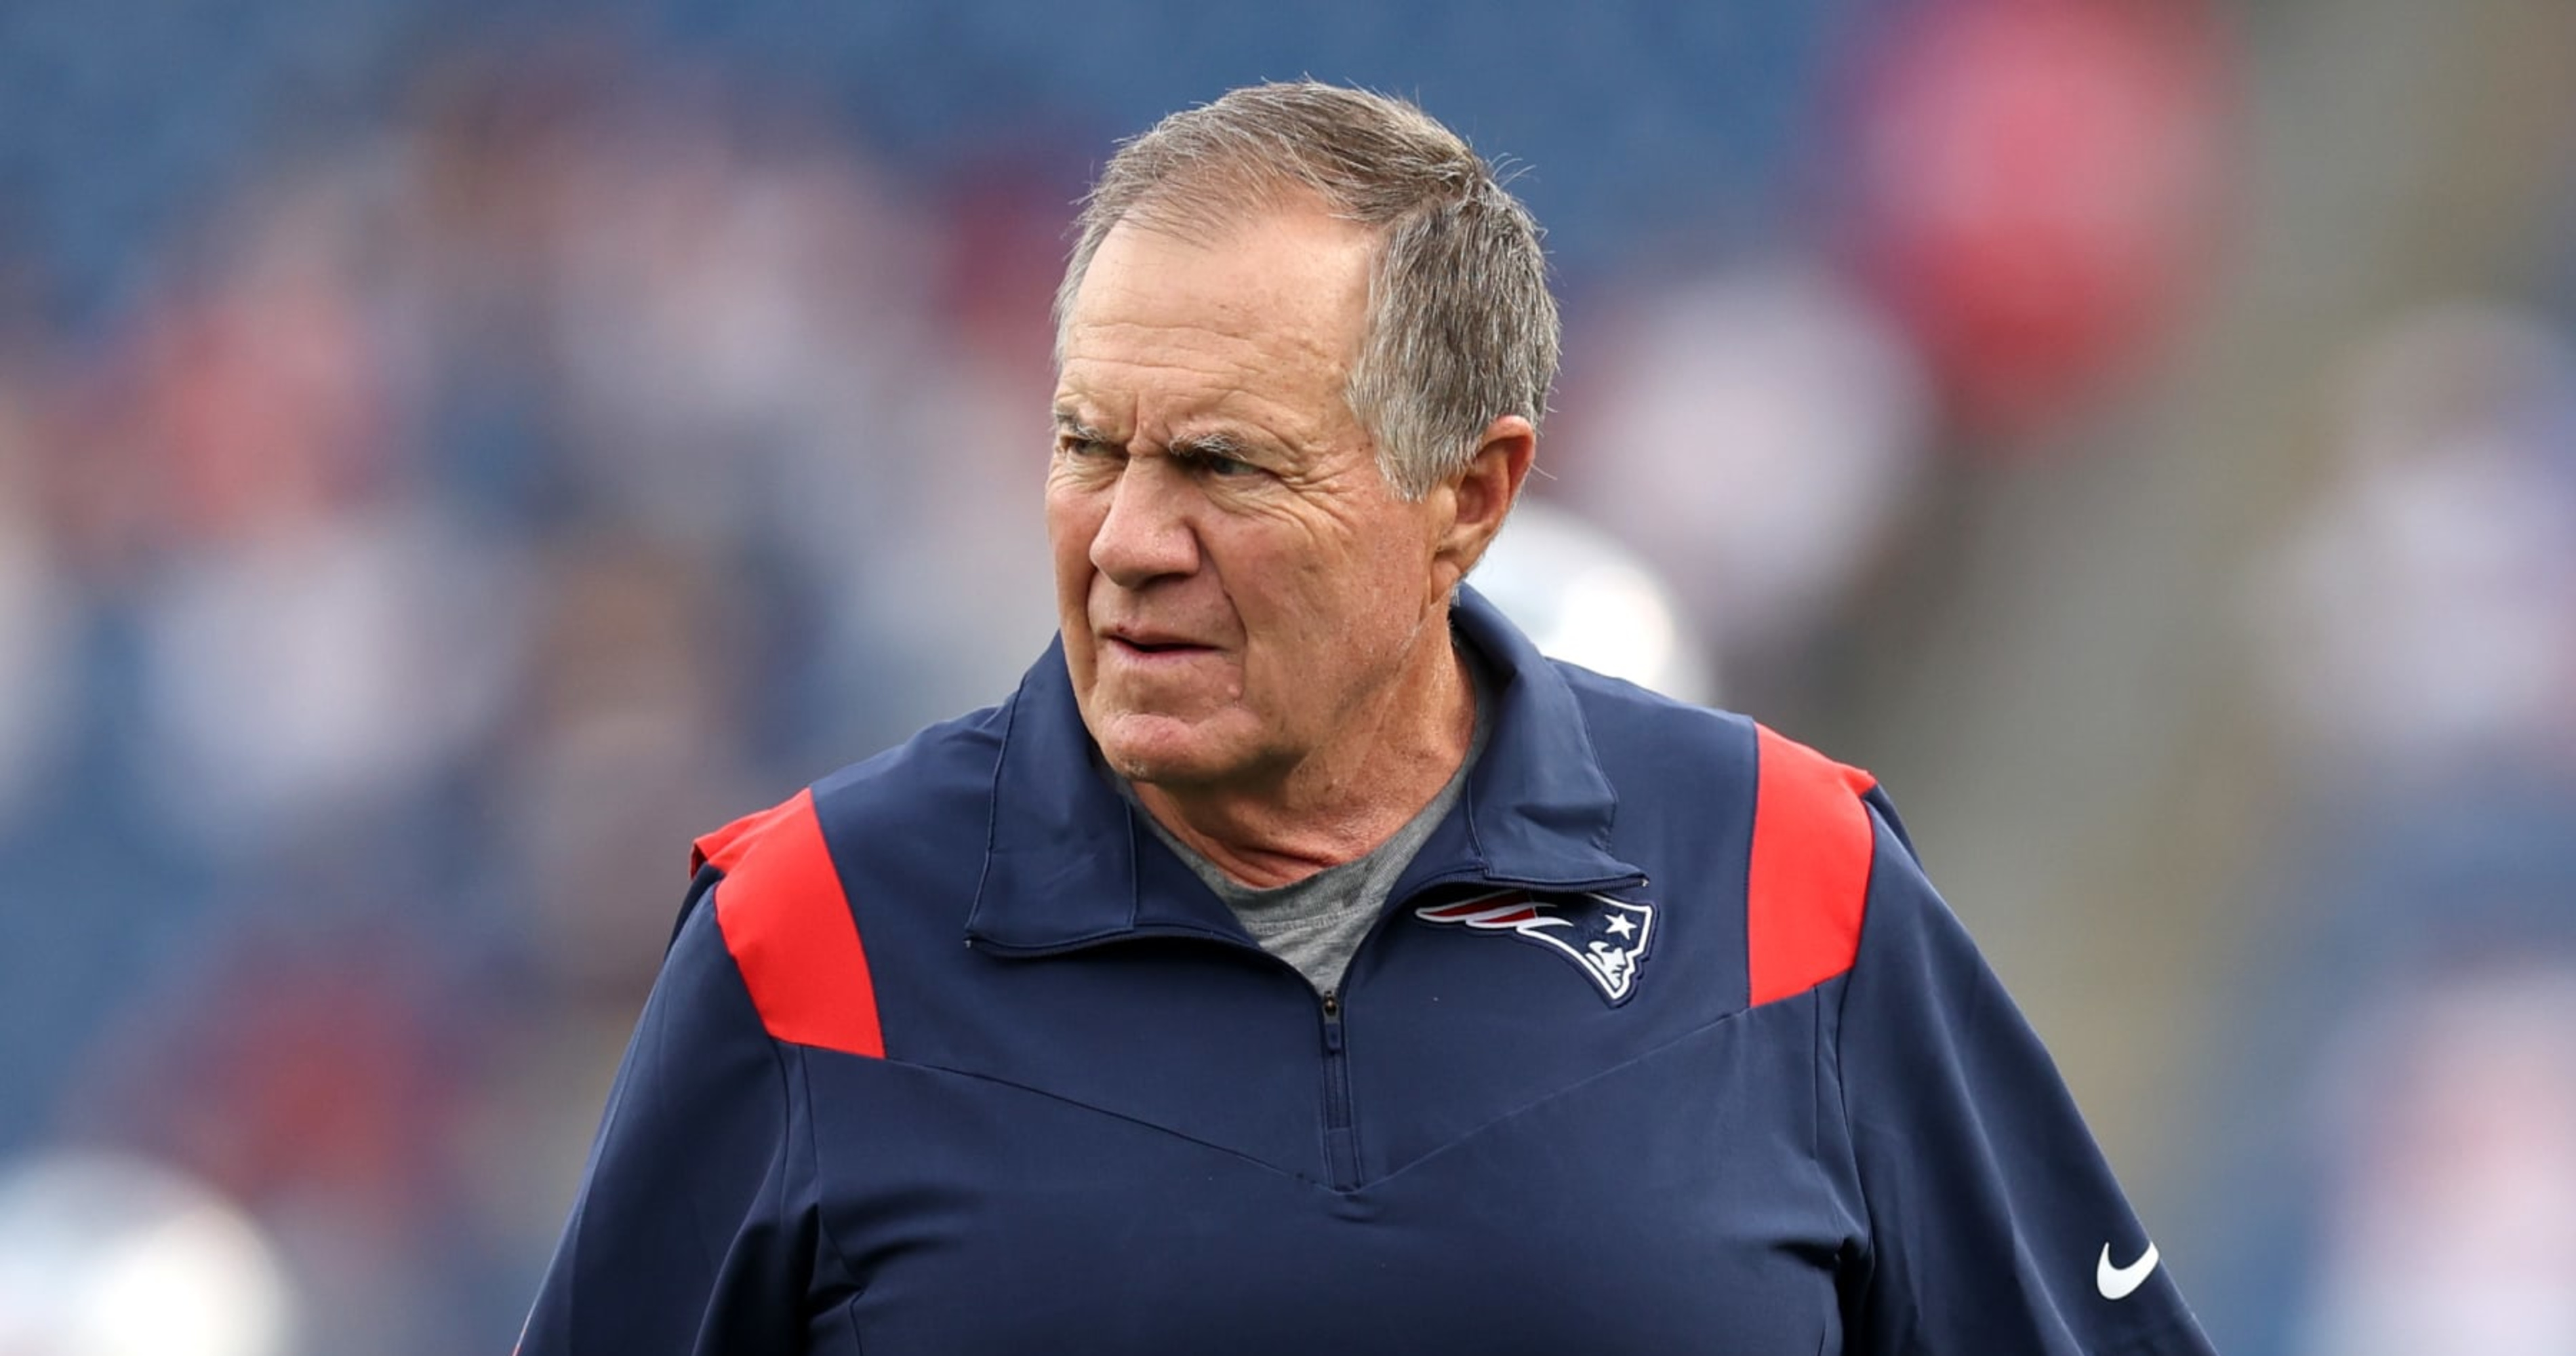 2022 NFL Head Coach Rankings: Bill Belichick, John Harbaugh and Andy Reid  lead the way, NFL News, Rankings and Statistics